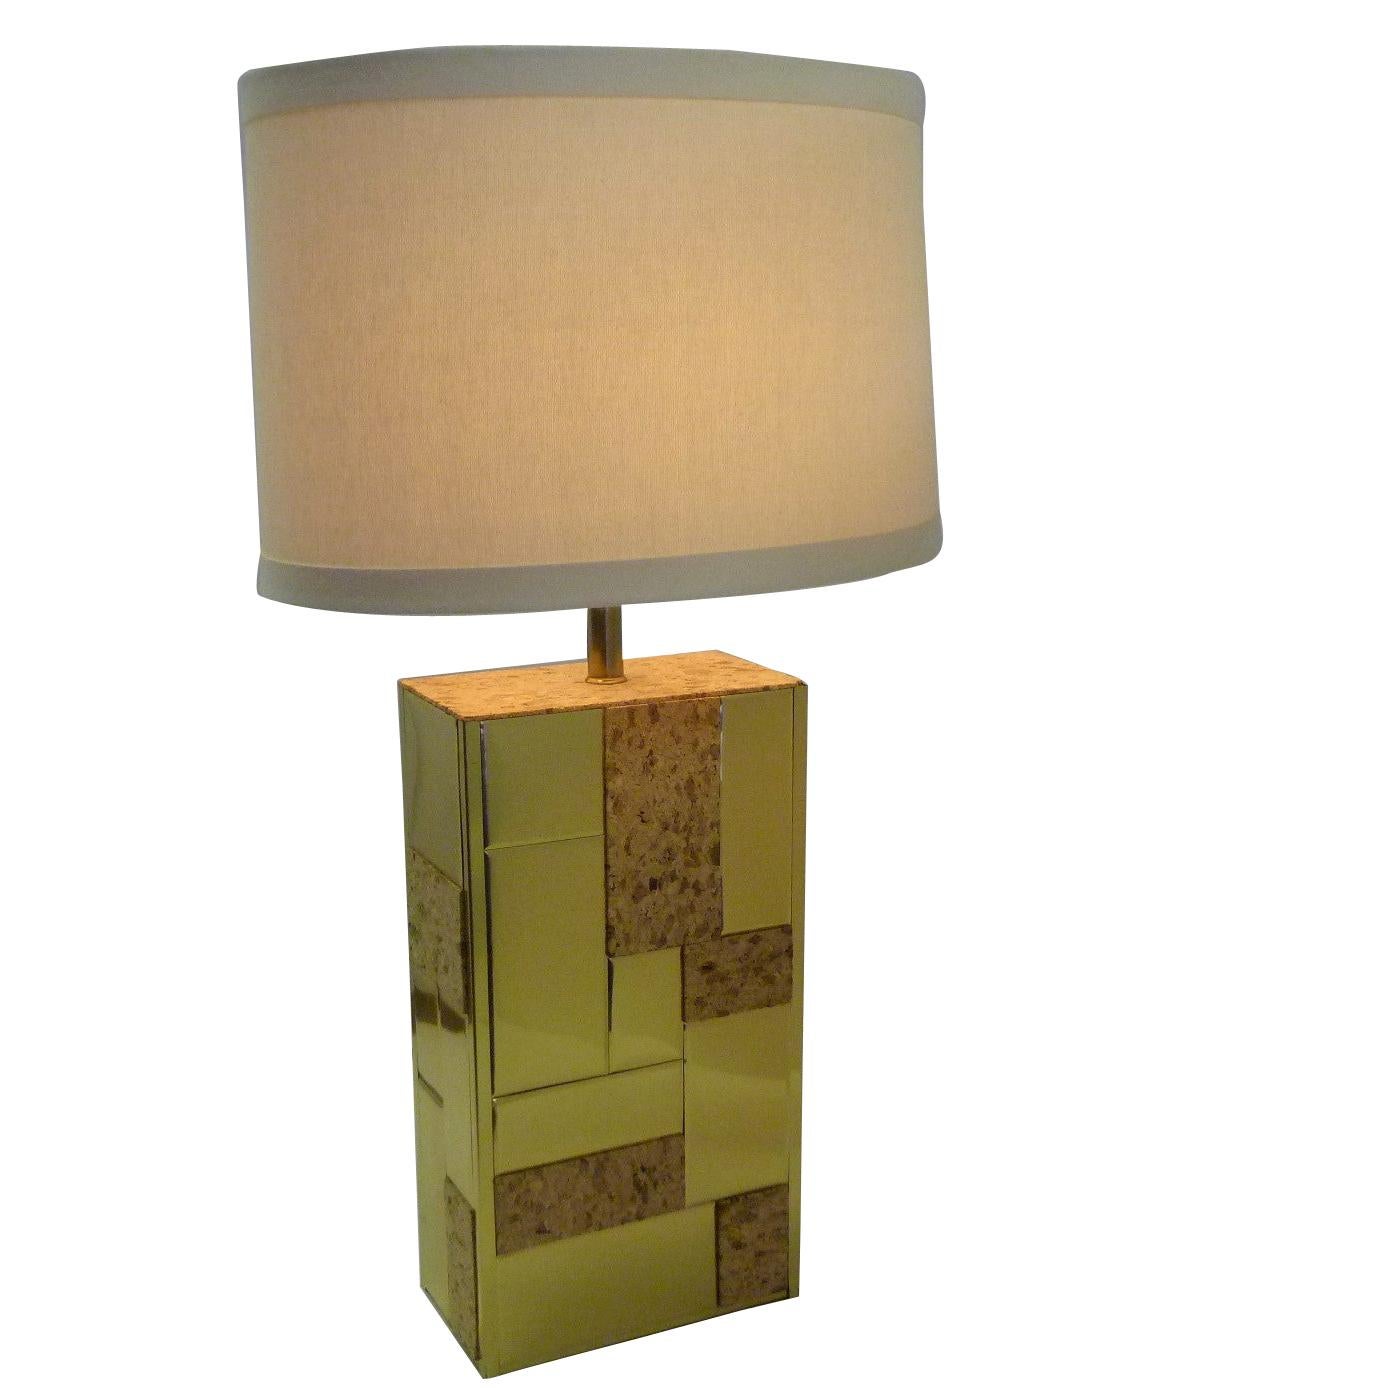 Brass Tile and Cork Paul Evans Cityscape Style 1970s Organic Modern Table Lamp